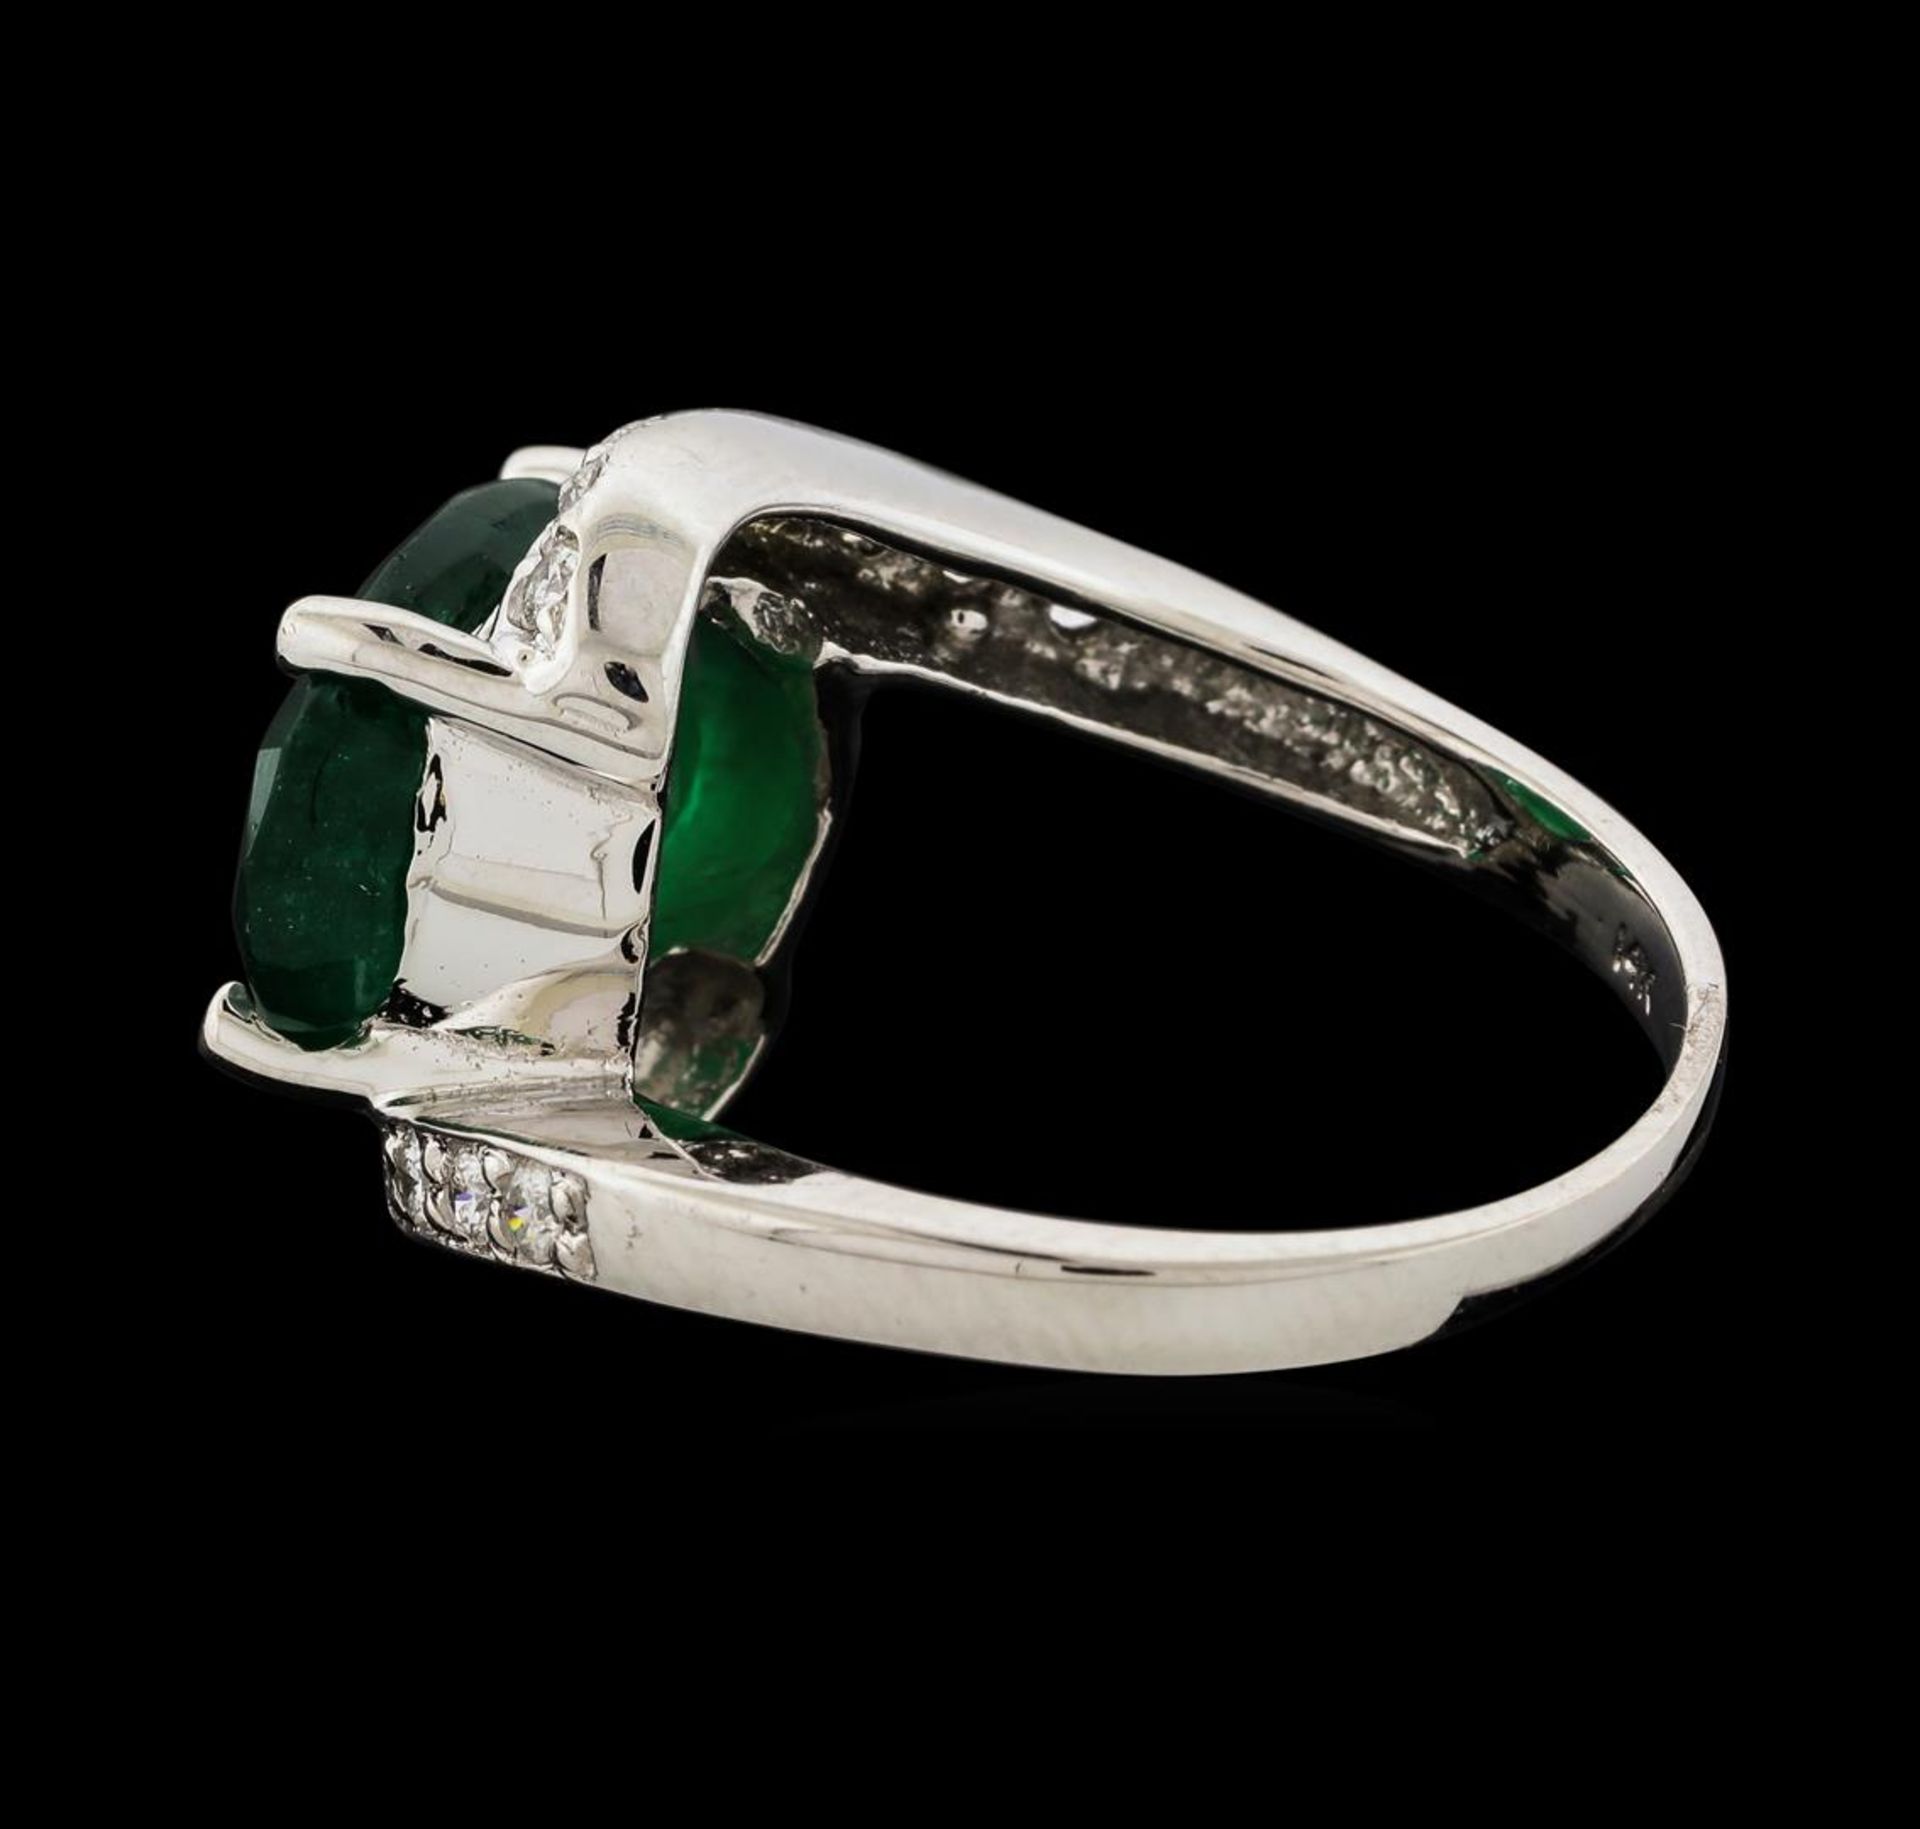 4.91 ctw Emerald and Diamond Ring - 14KT White Gold - Image 3 of 4